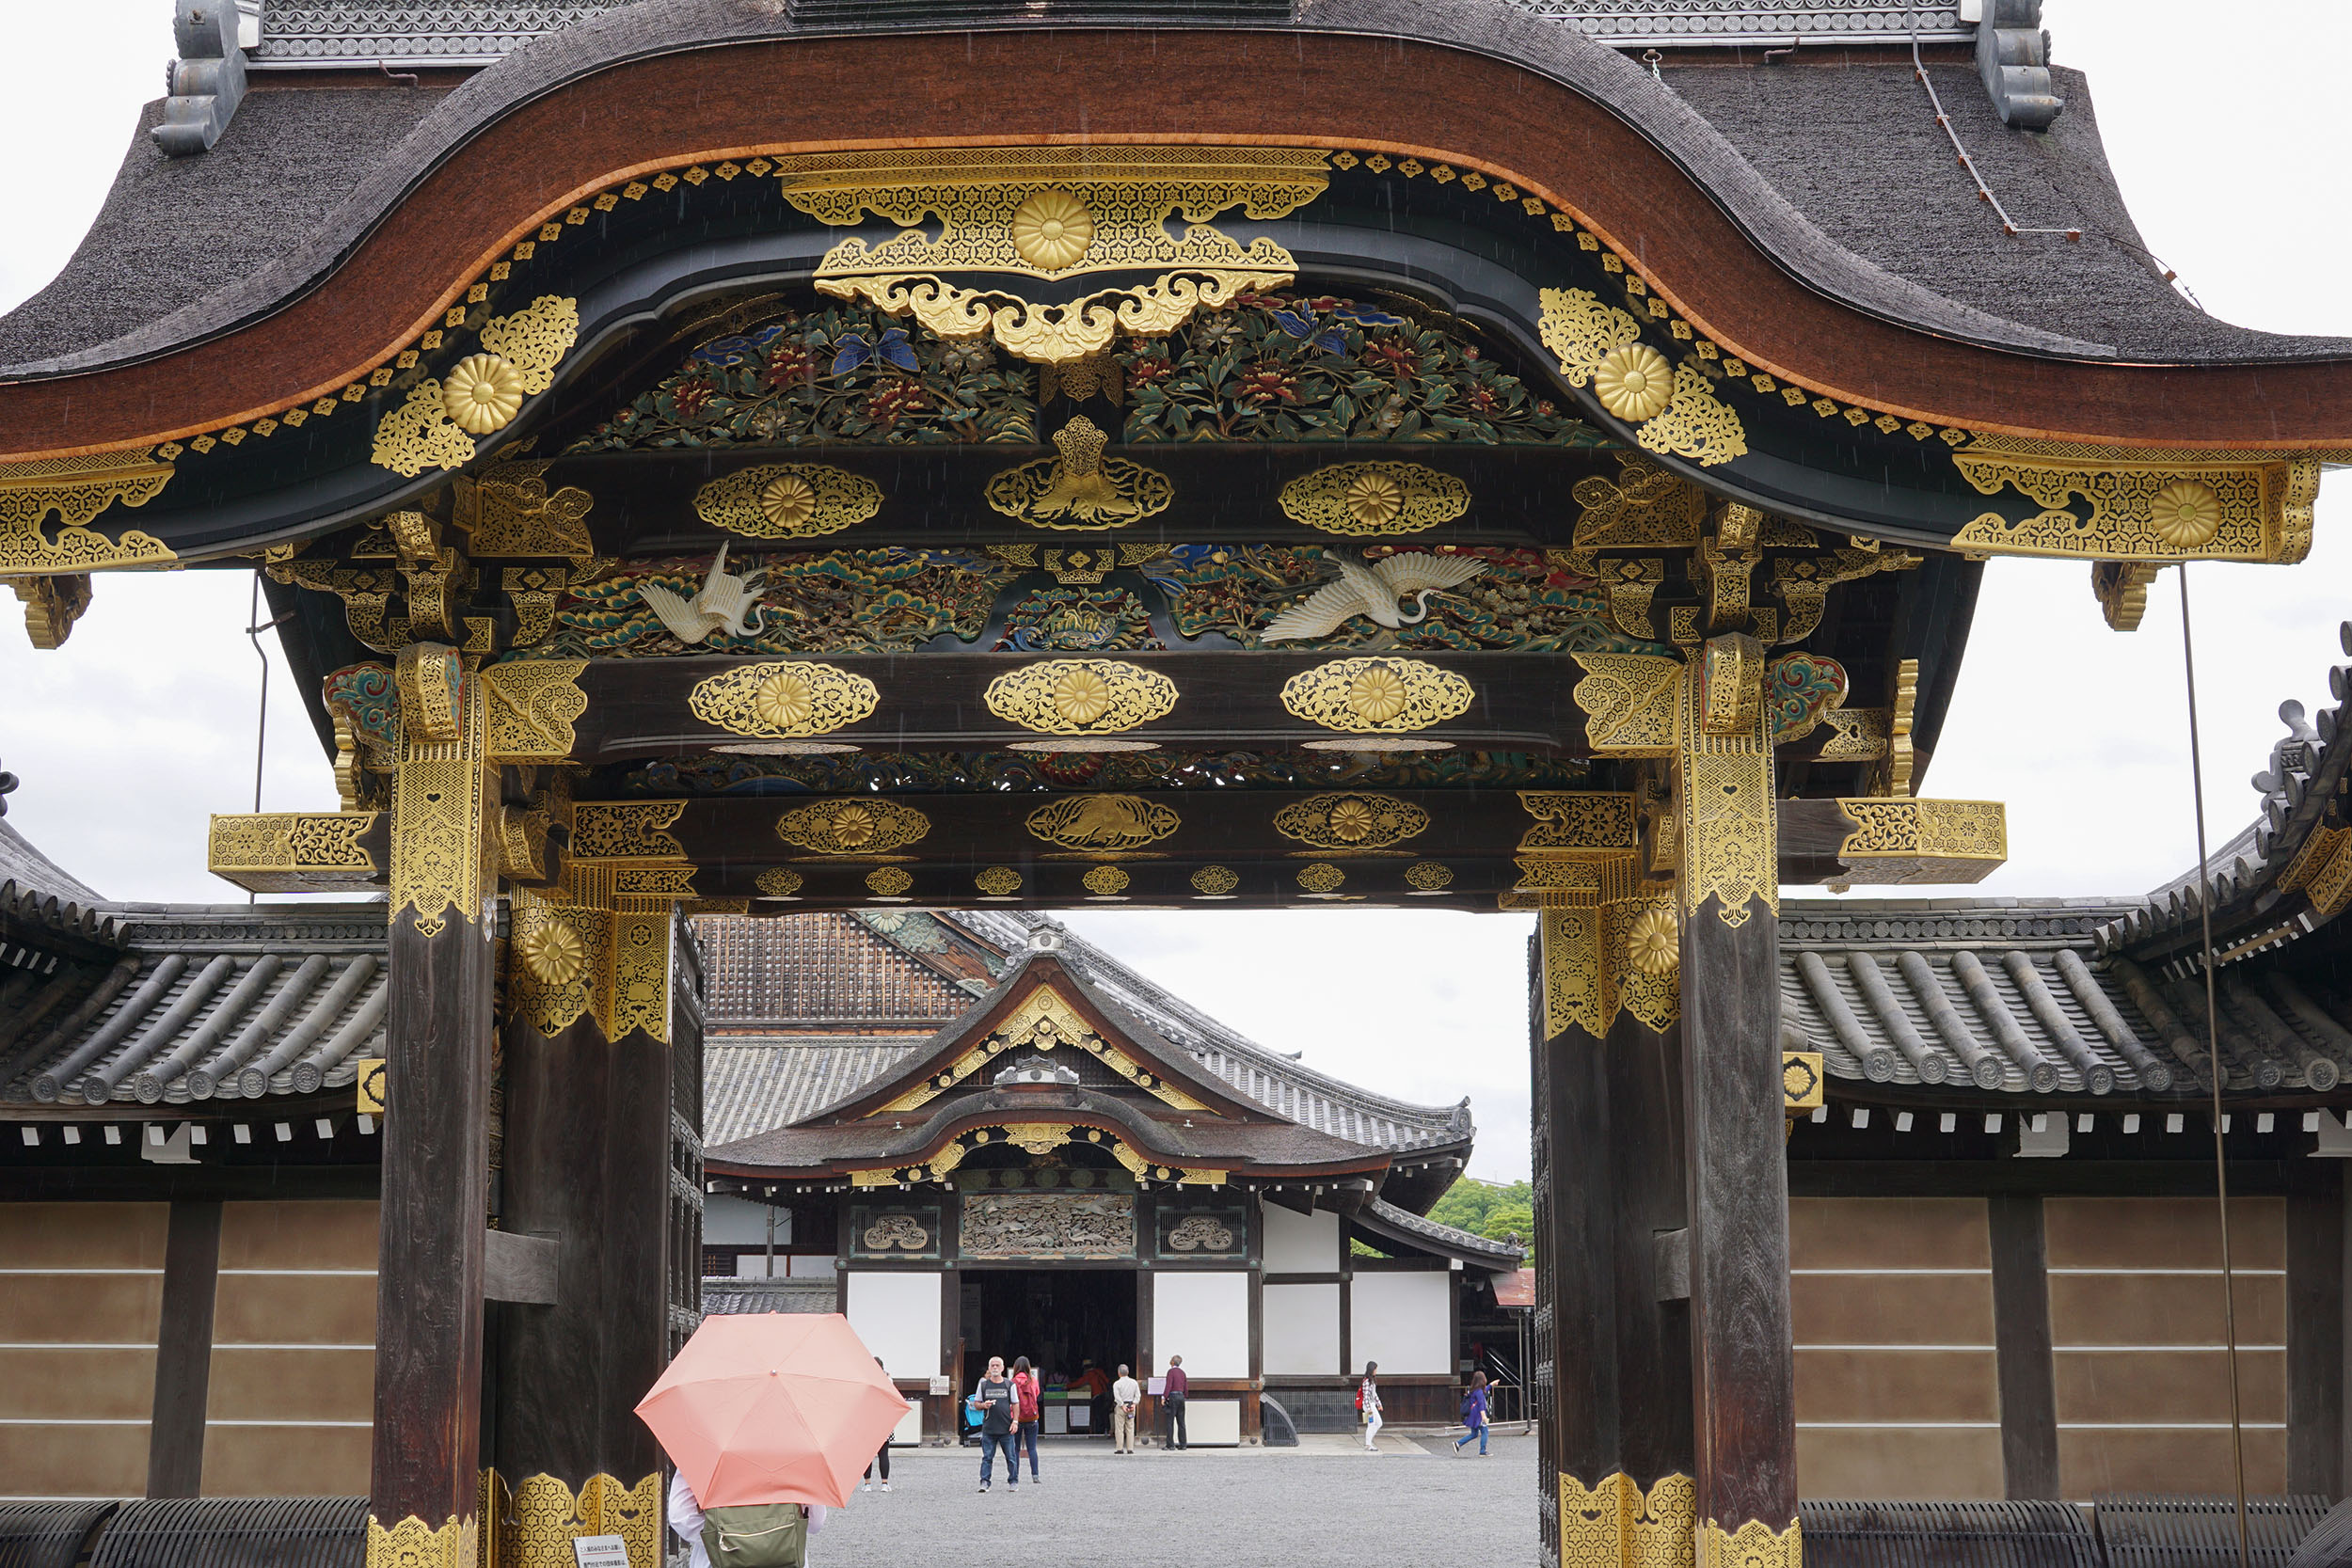 Visiting Nijo Castle with kids